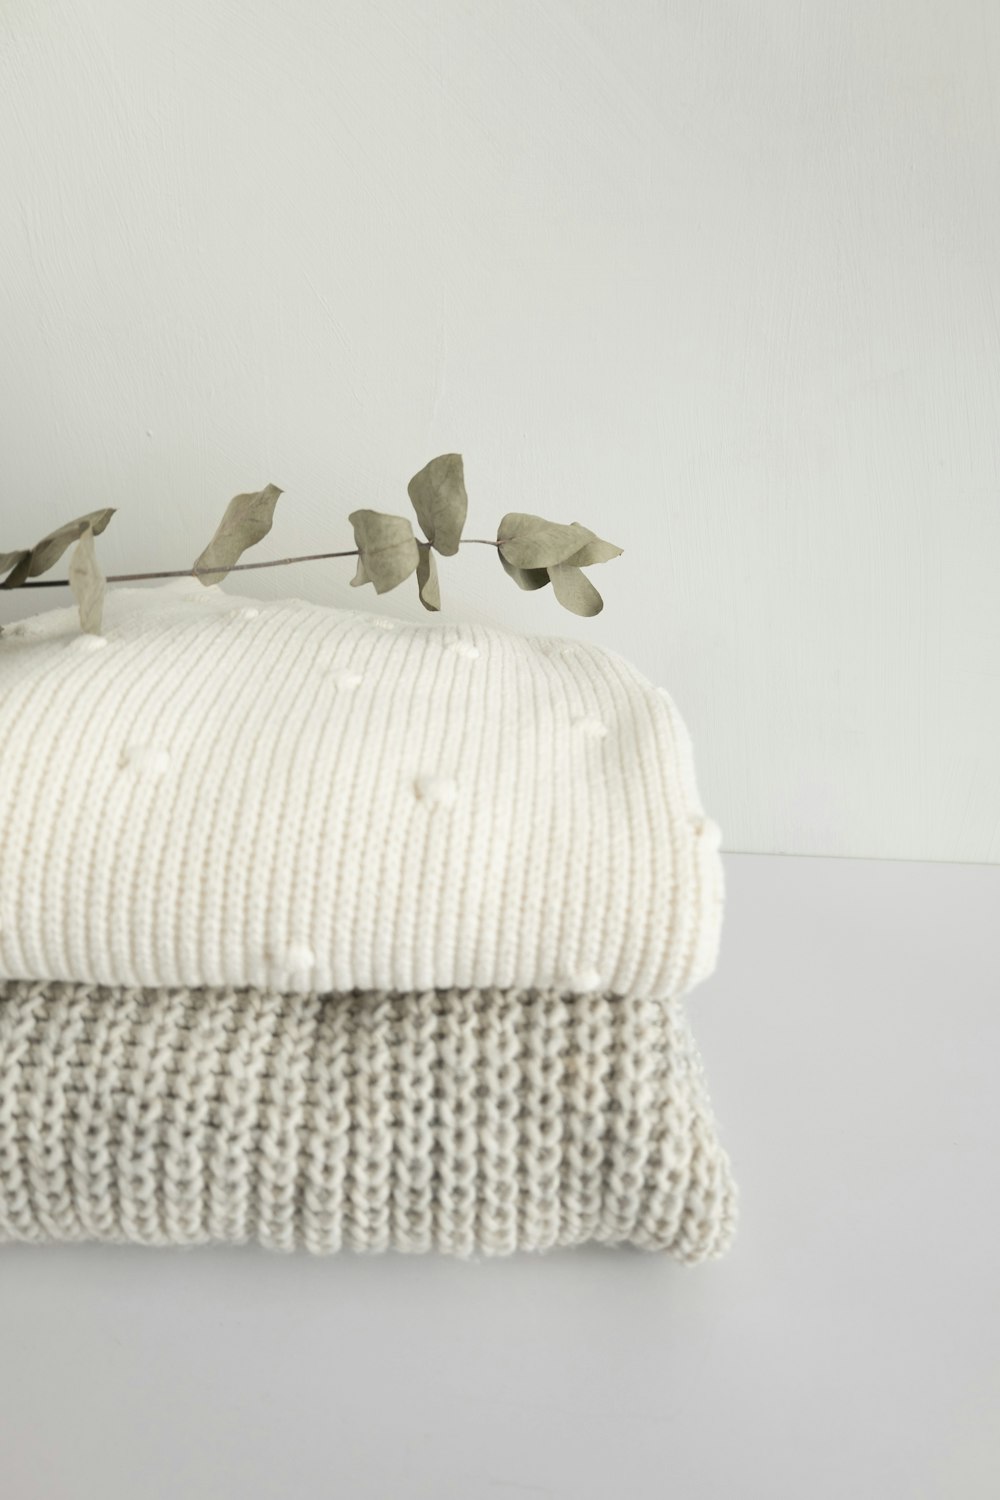 a stack of folded blankets with a plant on top